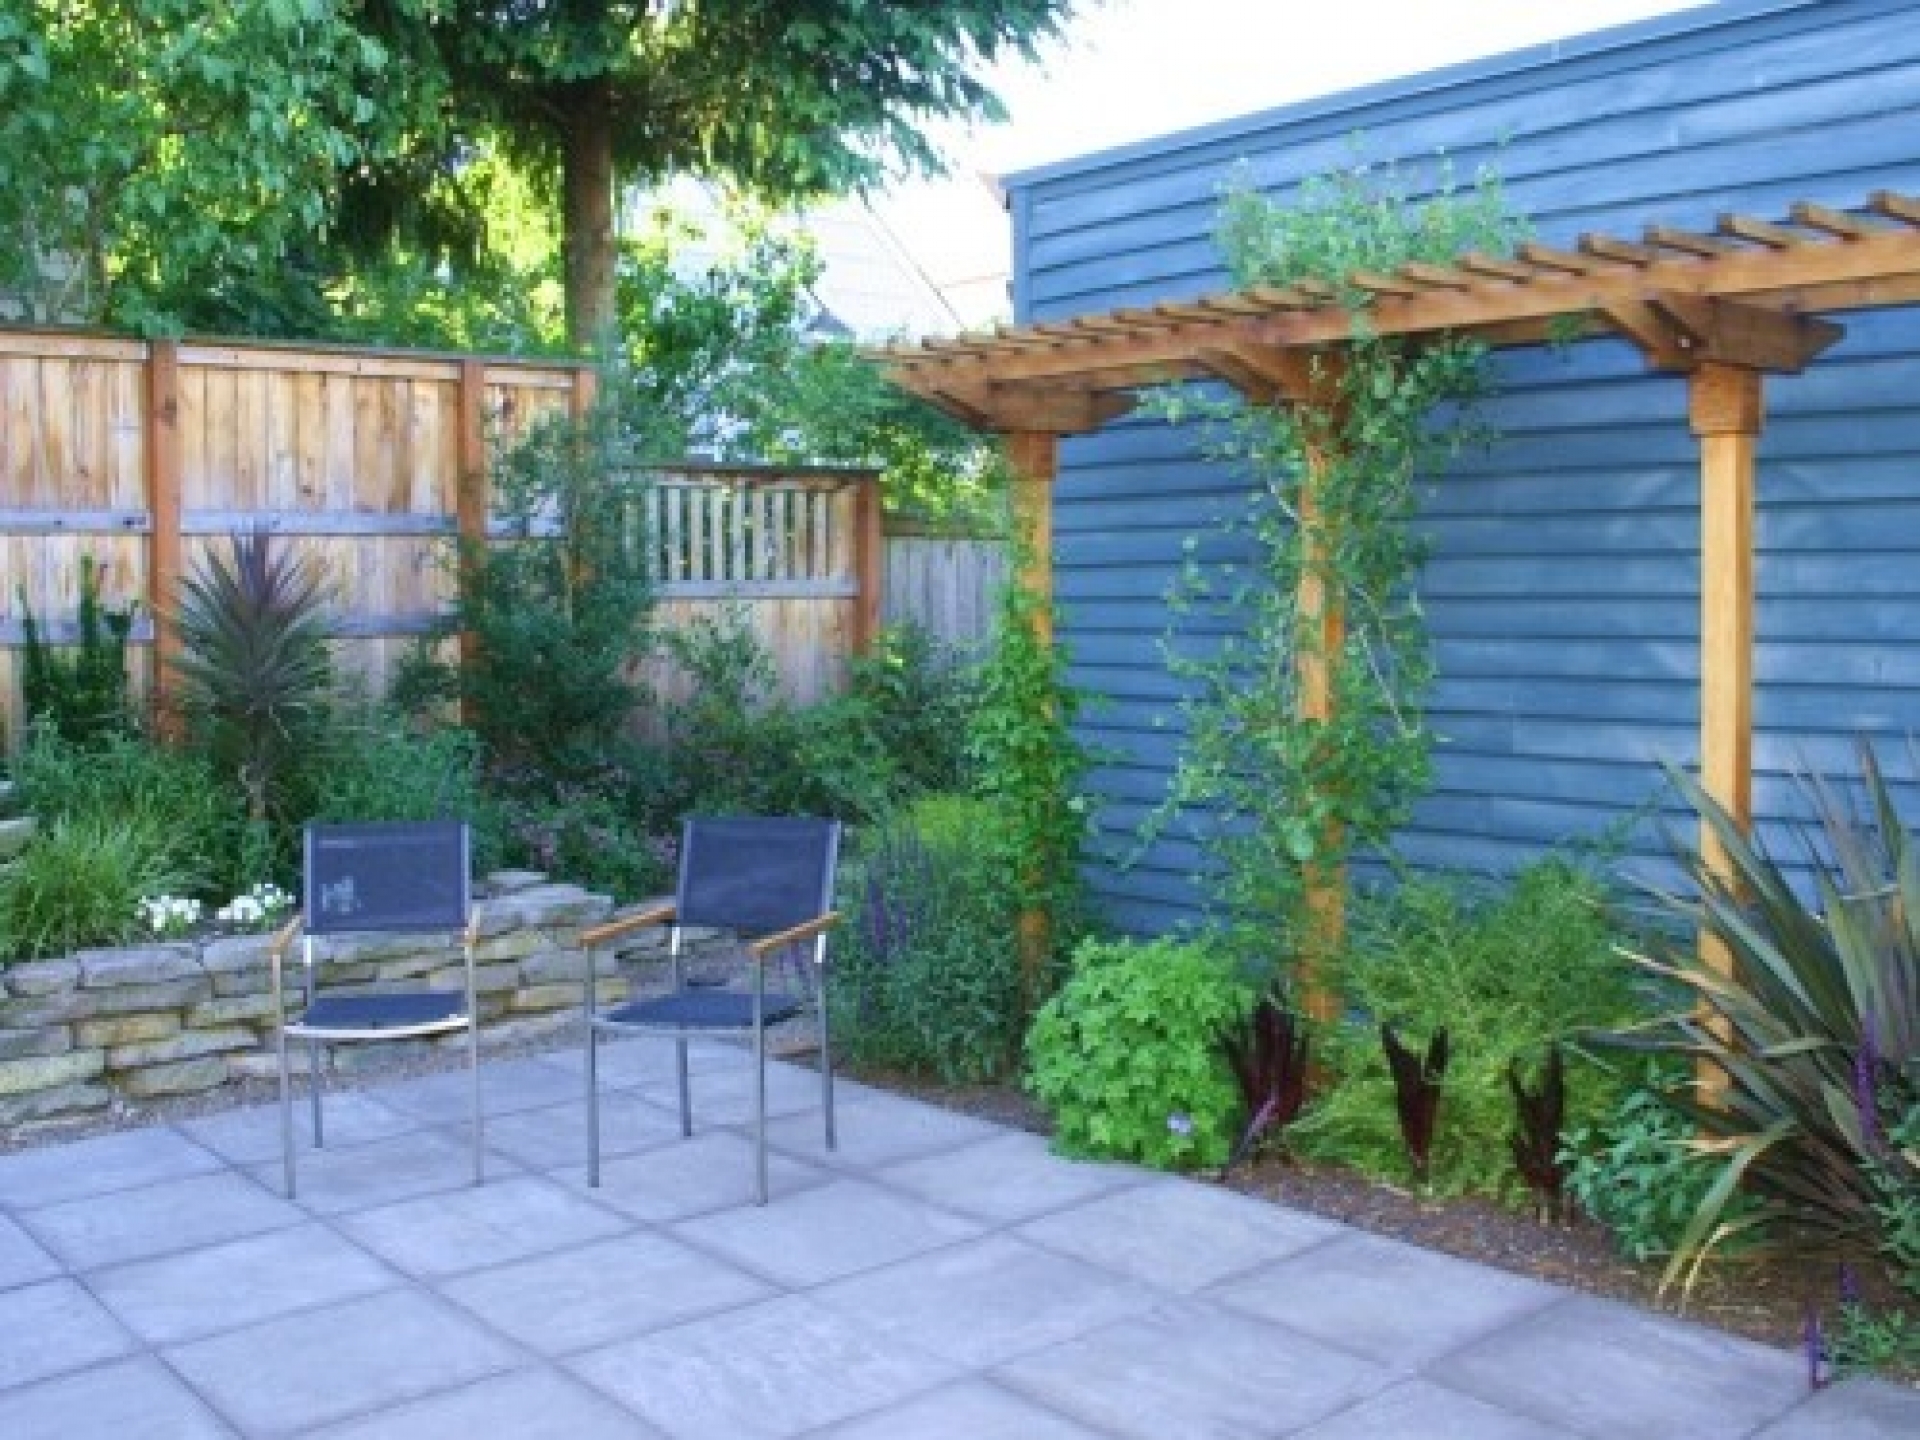 Backyard landscaping: styles and pieces of advice | Journal of interesting articles